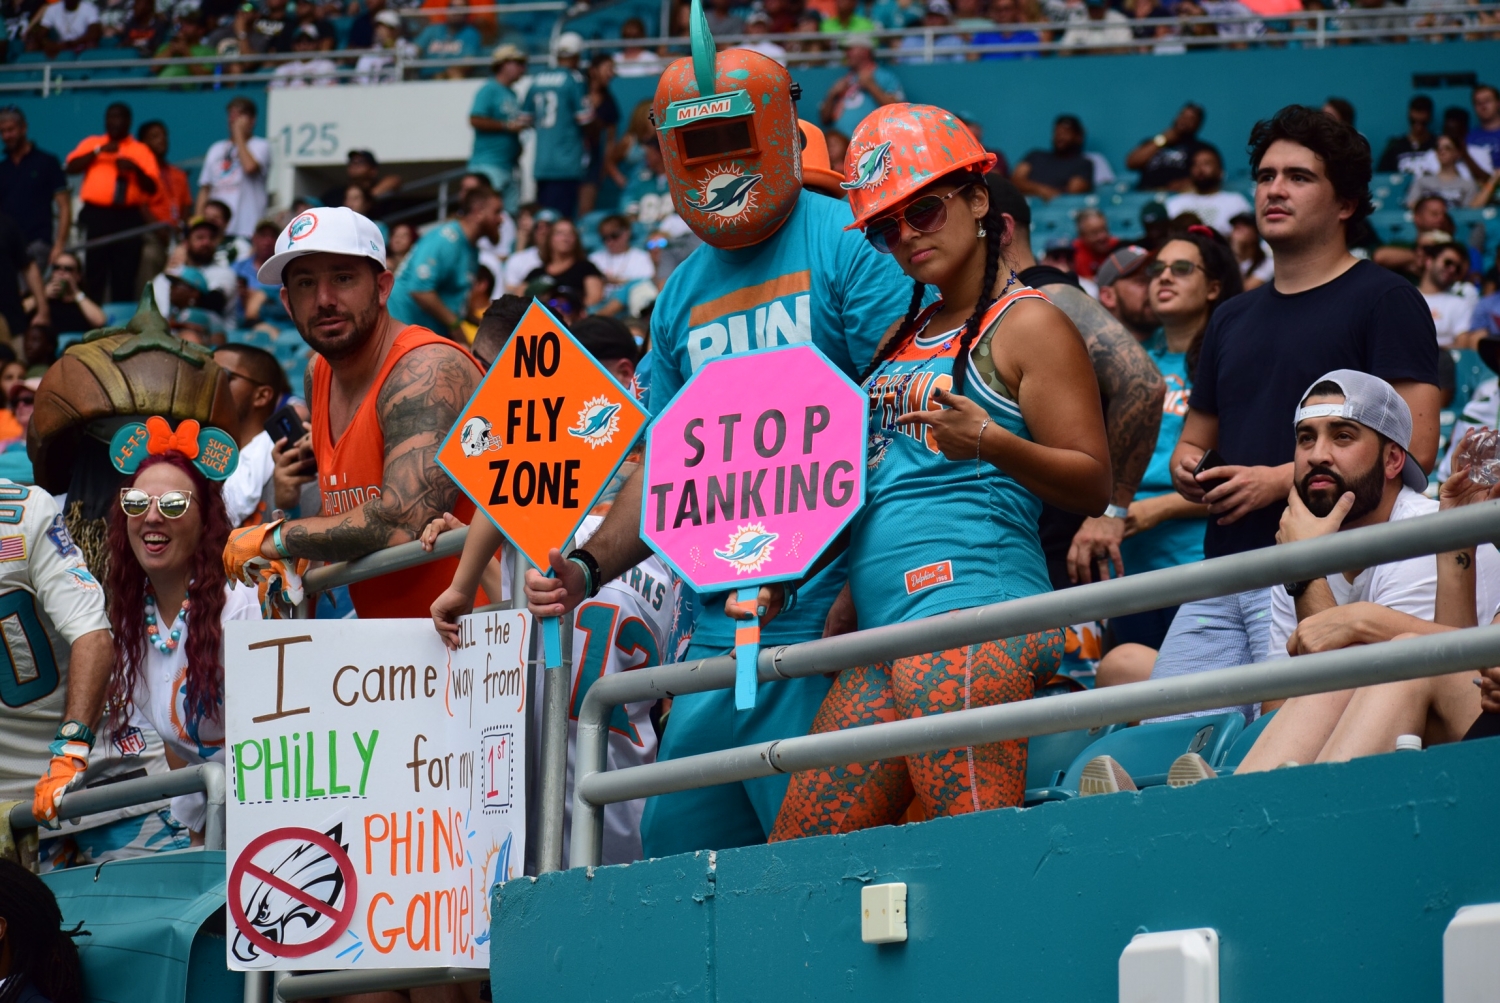 Some fans question the tanking objective. (Tony Capobianco for Five Reasons Sports)